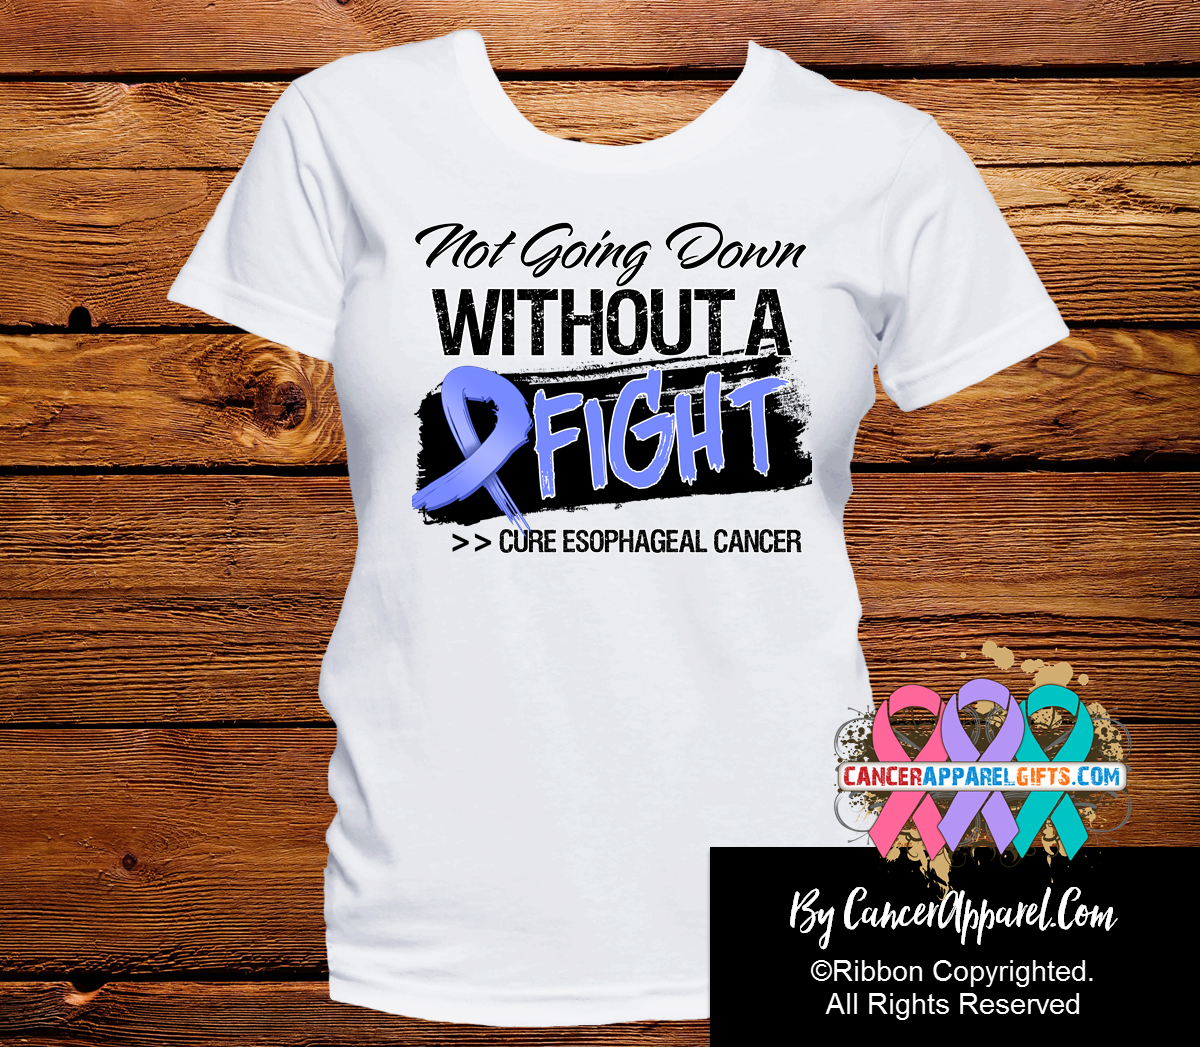 Esophageal Cancer Not Going Down Without a Fight Shirts - Cancer Apparel and Gifts